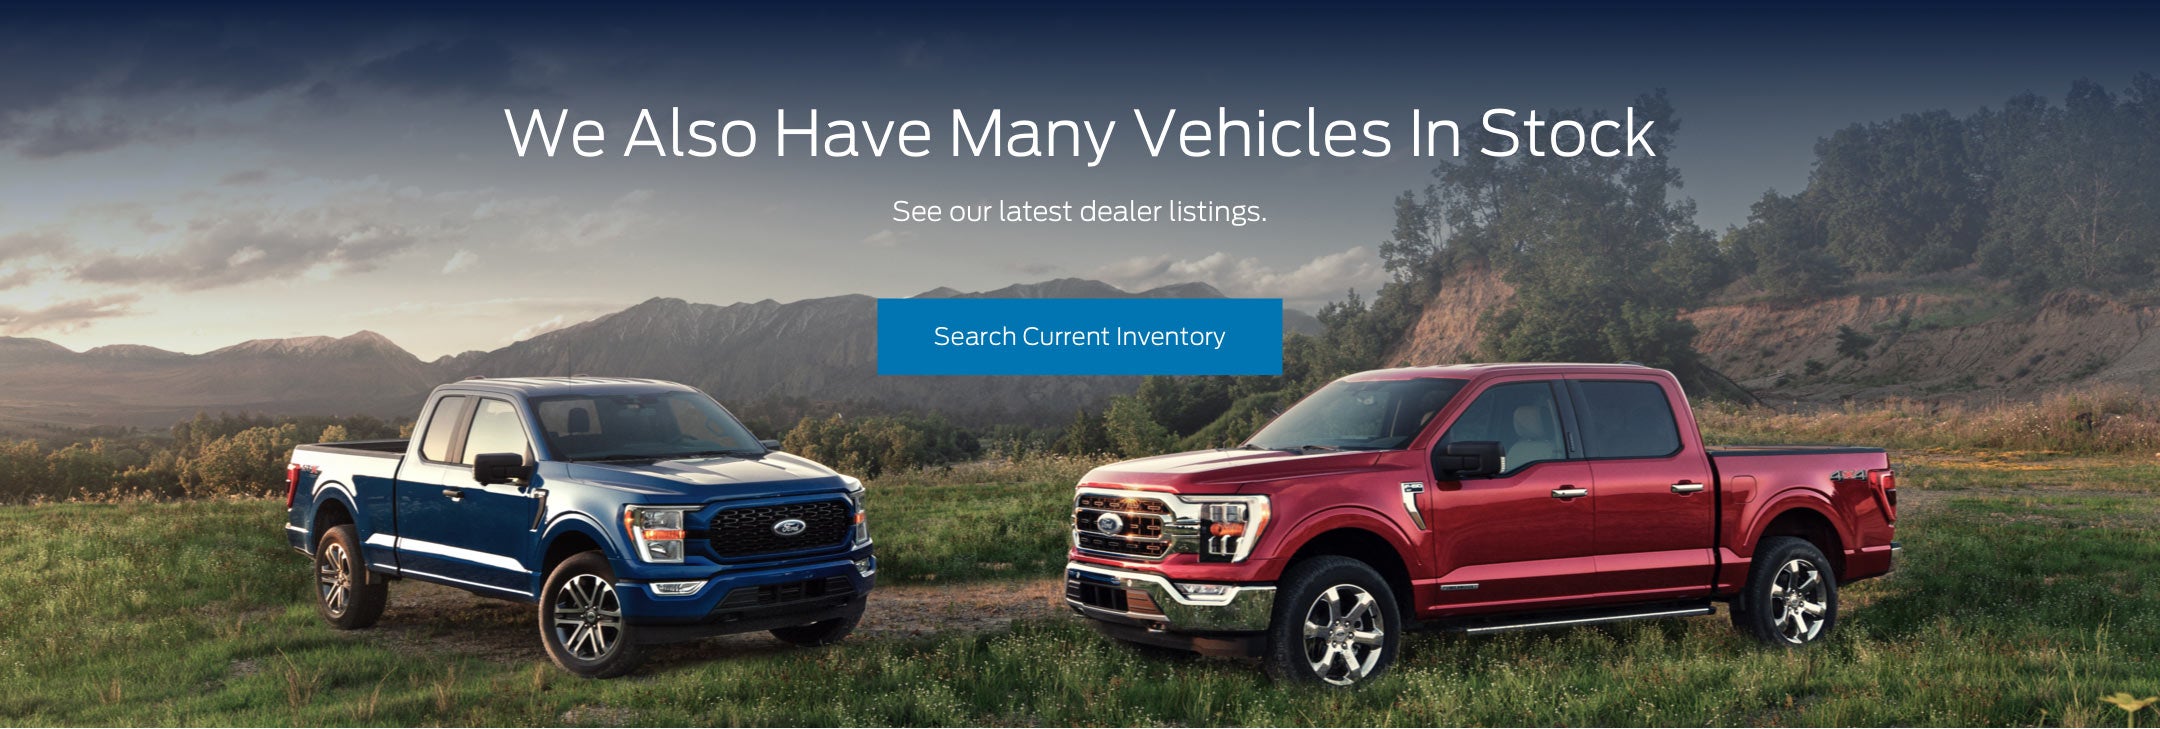 Ford vehicles in stock | Lake Ford in Lewistown PA